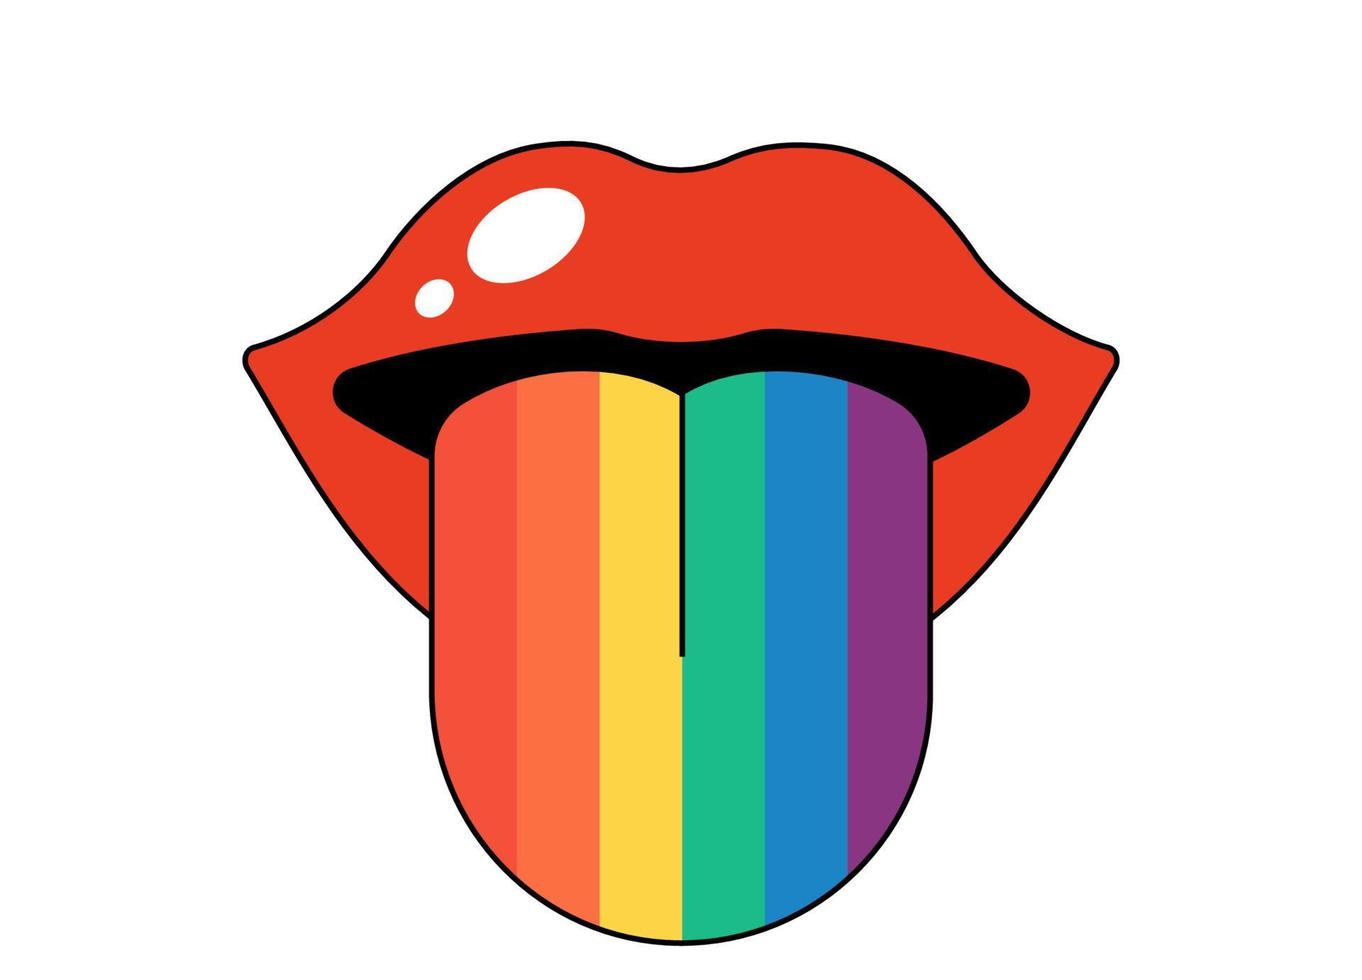 Retro groovy opened mouth with rainbow colored tongue sticking out and licking. Hippy red open lips. Funky psychedelic female lip. Vintage positive hippie sticker print. Trendy y2k pop art EPS patch vector